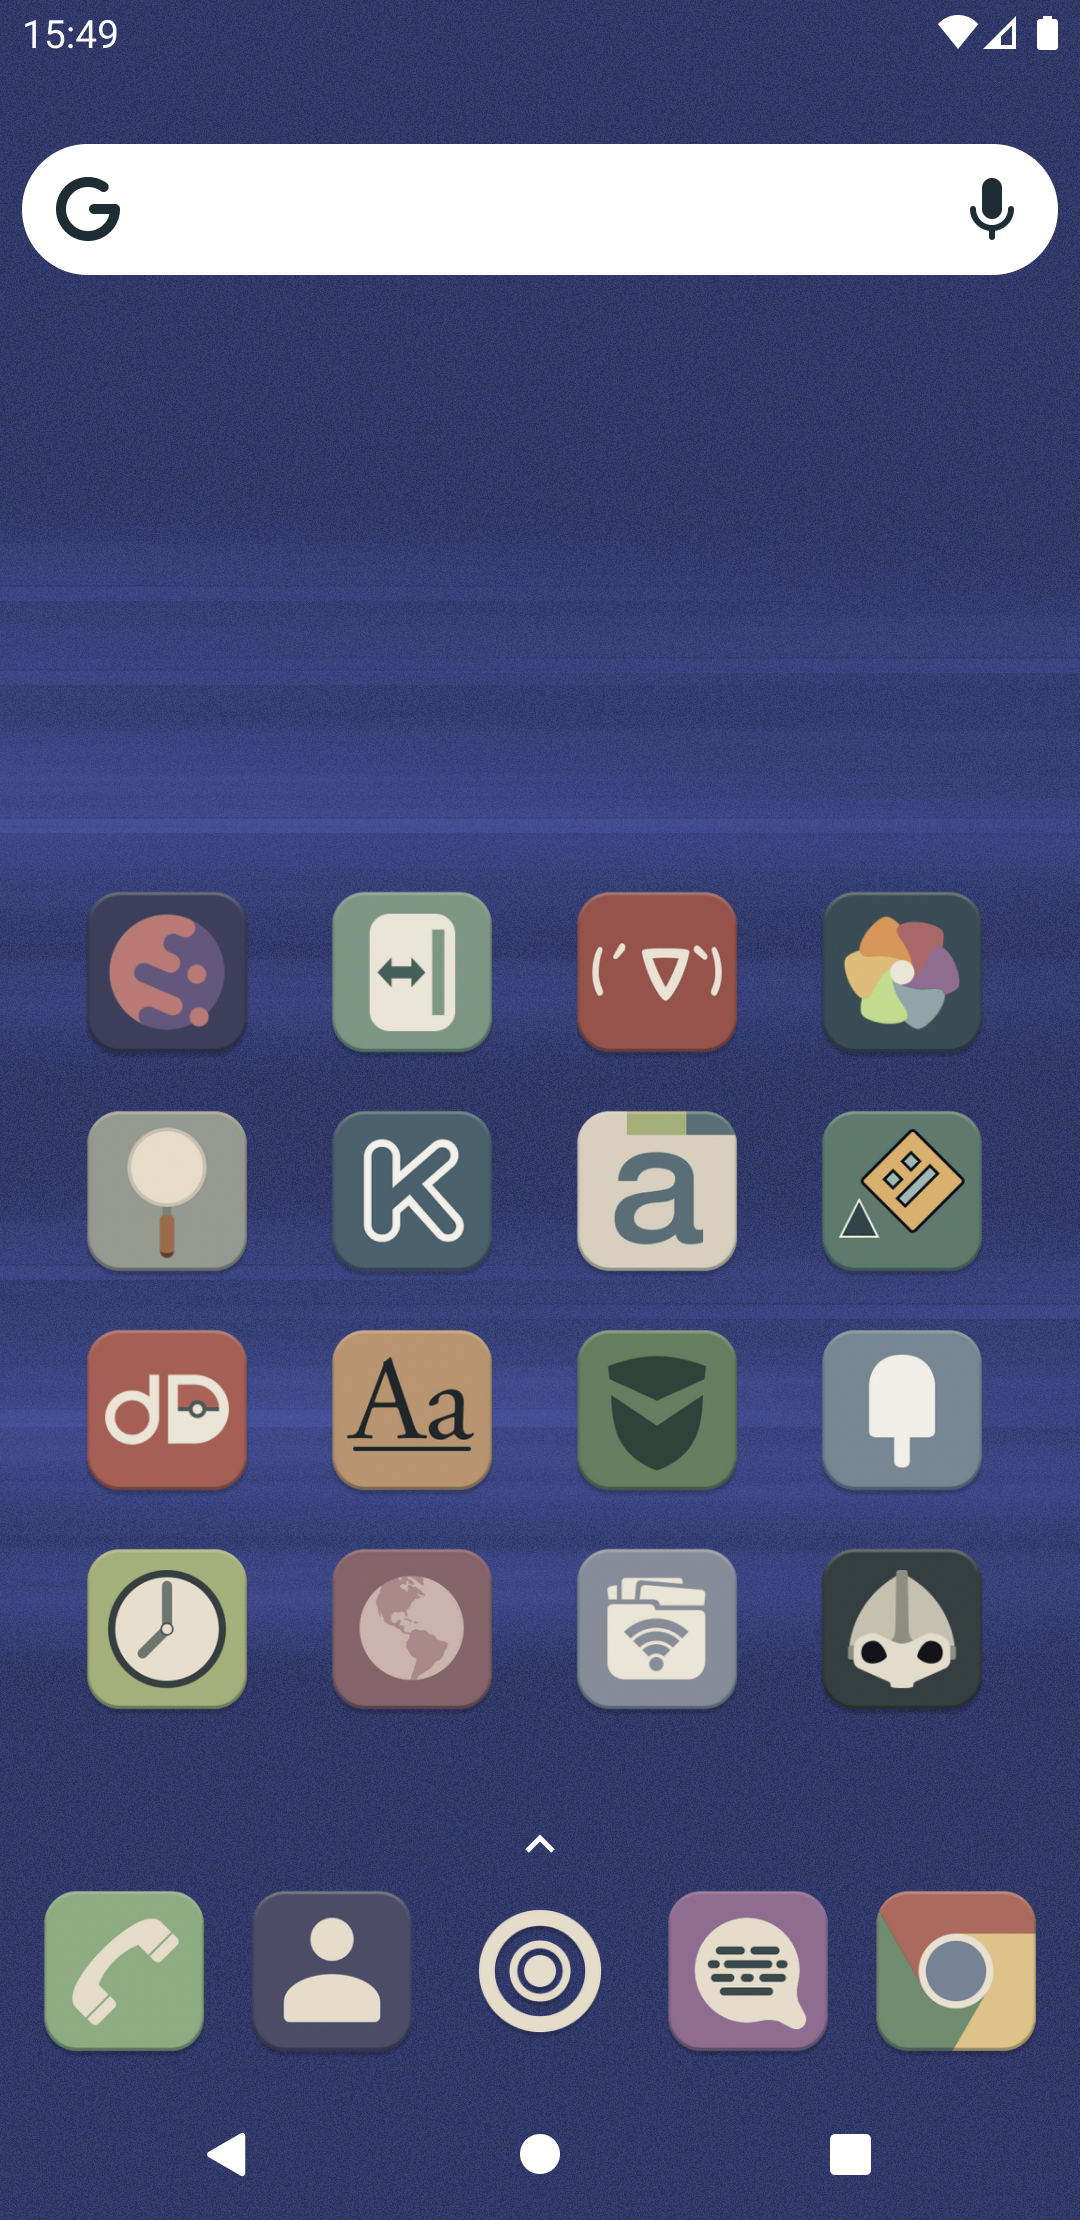 Android application Kaorin icon pack screenshort